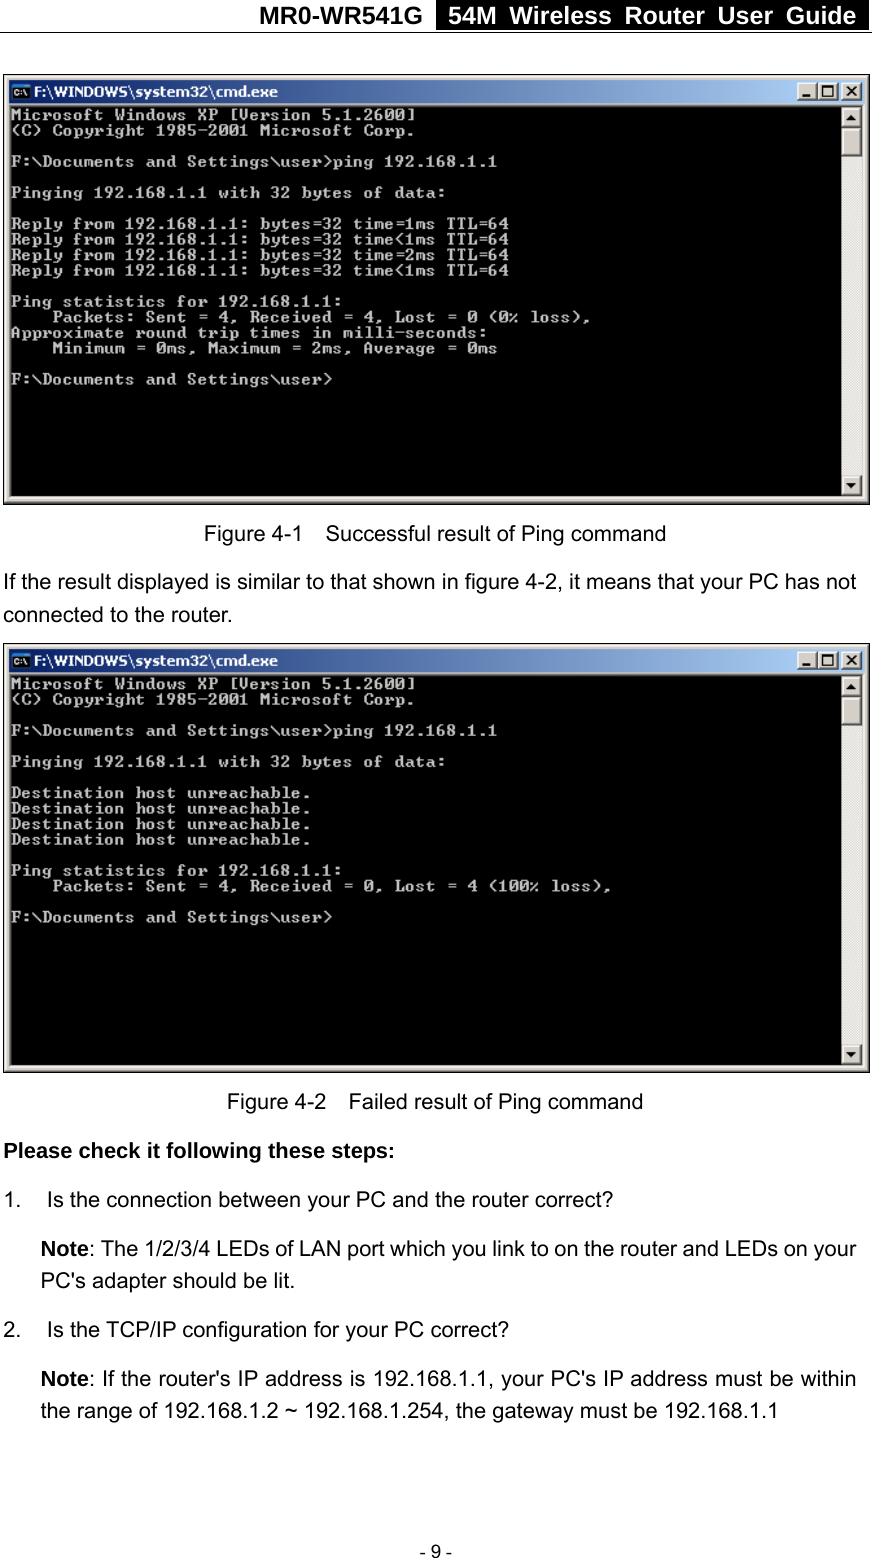 MR0-WR541G   54M Wireless Router User Guide    Figure 4-1    Successful result of Ping command If the result displayed is similar to that shown in figure 4-2, it means that your PC has not connected to the router.     Figure 4-2    Failed result of Ping command Please check it following these steps: 1.  Is the connection between your PC and the router correct? Note: The 1/2/3/4 LEDs of LAN port which you link to on the router and LEDs on your PC&apos;s adapter should be lit. 2. Is the TCP/IP configuration for your PC correct? Note: If the router&apos;s IP address is 192.168.1.1, your PC&apos;s IP address must be within the range of 192.168.1.2 ~ 192.168.1.254, the gateway must be 192.168.1.1  - 9 - 